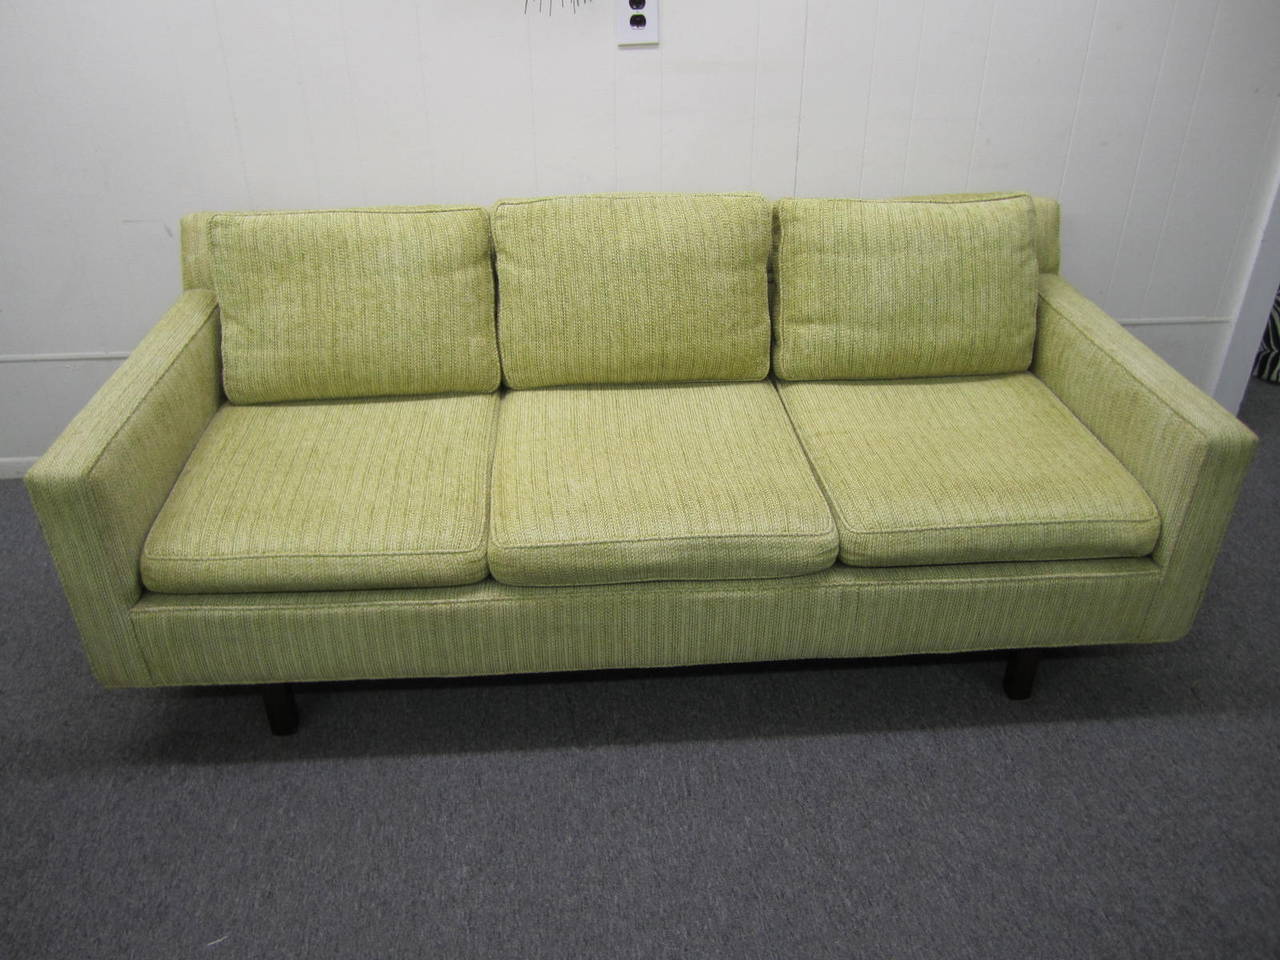 Stunning signed Dunbar 3 seater sofa.  This piece is upholstered in it's original celery green woven wool in very nice to excellent condition. The loose seat cushions are quite firm and will need new foam-the rest of the sofa is quite soft and not